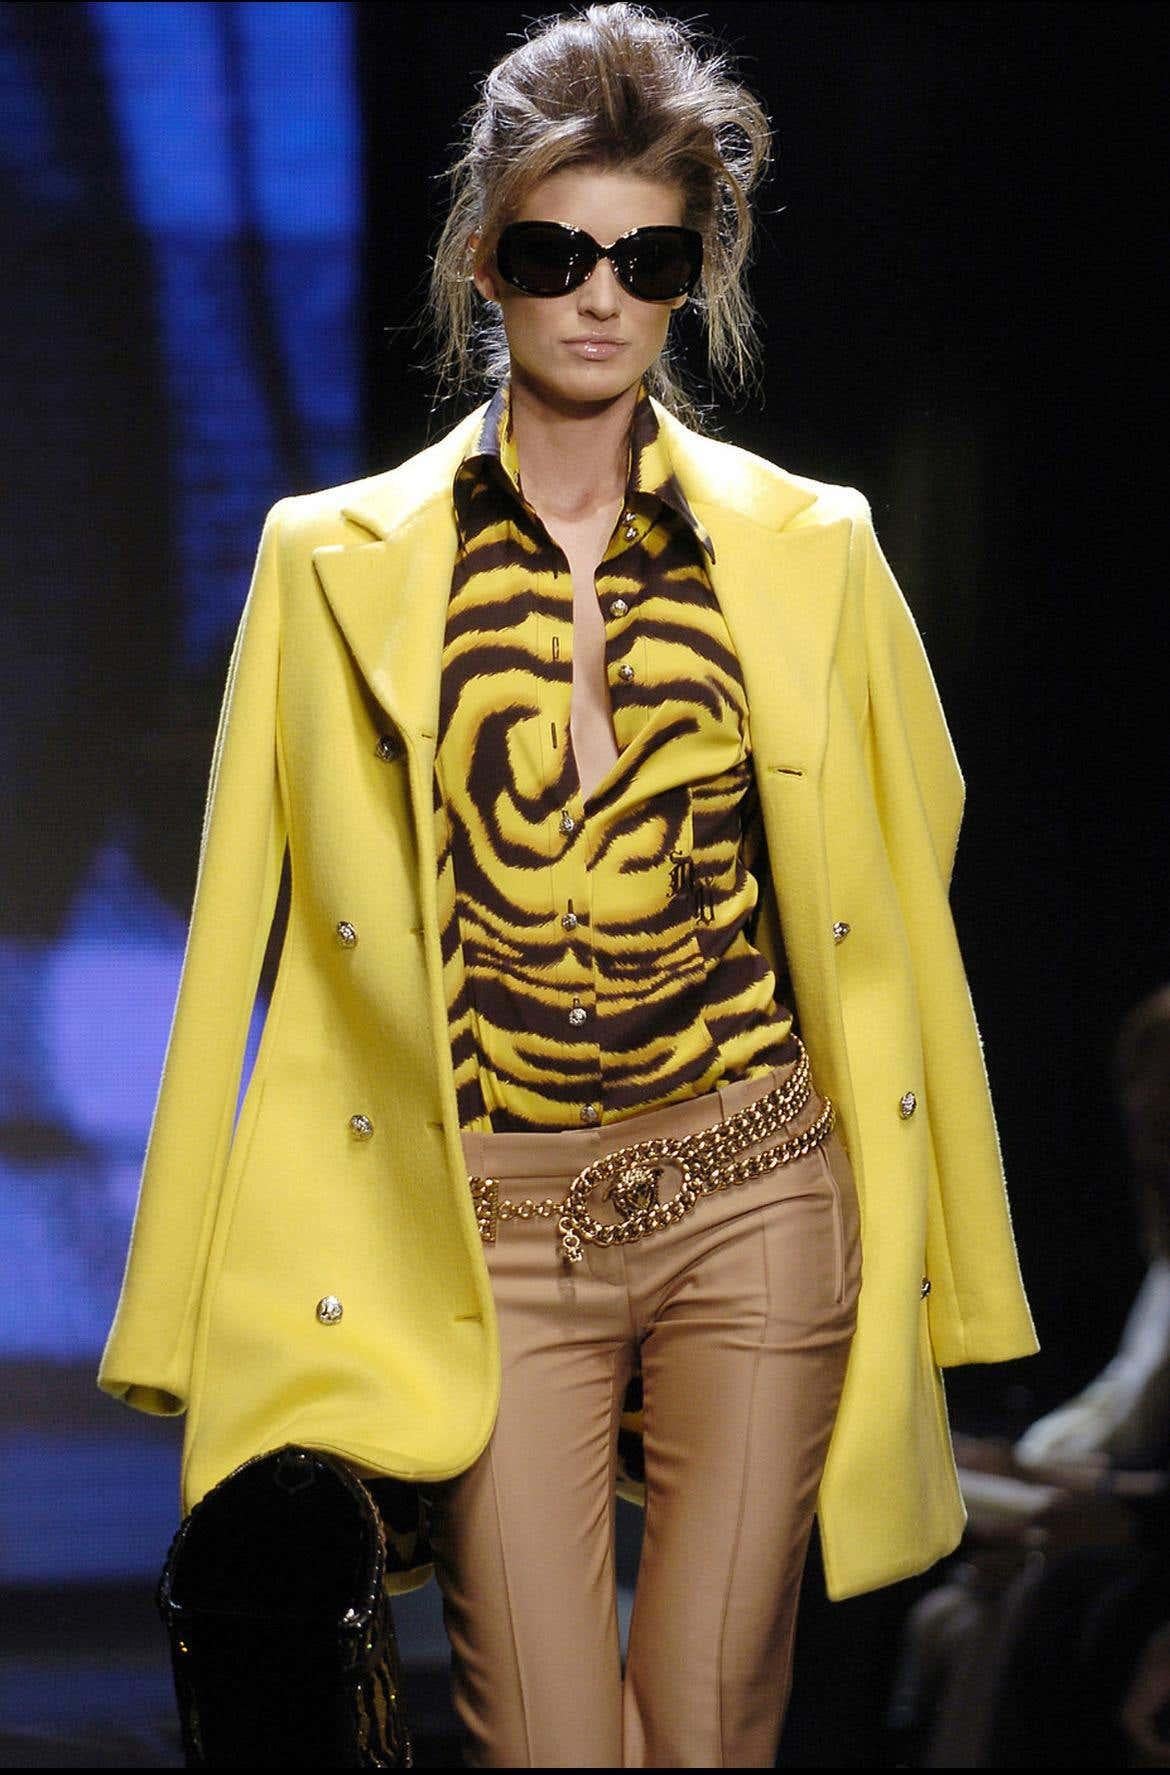 Presenting a beautiful bold yellow and black tiger stripe Versace dress designed by Donatella Versace. This gorgeous print debuted from the Fall/Winter 2004 collection in several looks on the season's runway. This new with tags form-fitting dress